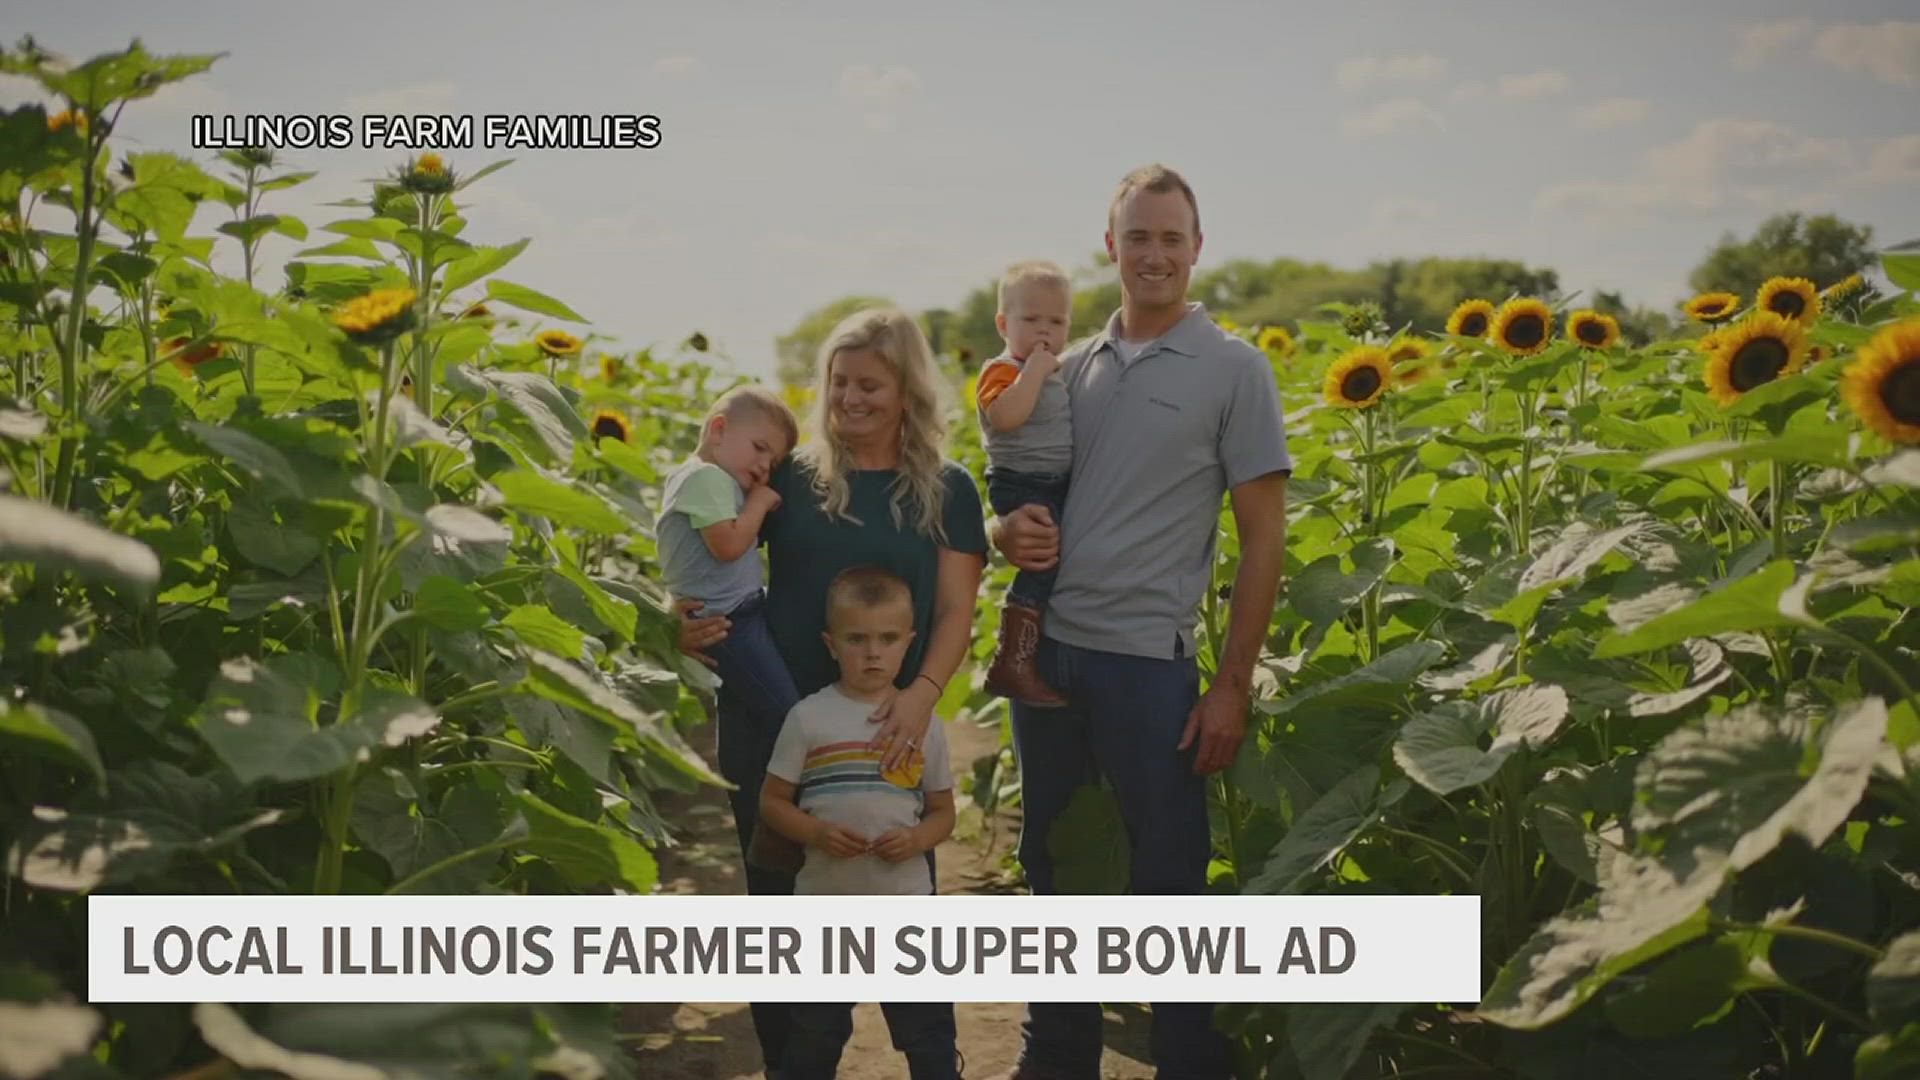 As the big game approaches, this Quad Cities area family from Viola is starring in a Super Bowl commercial highlighting Illinois farmers.